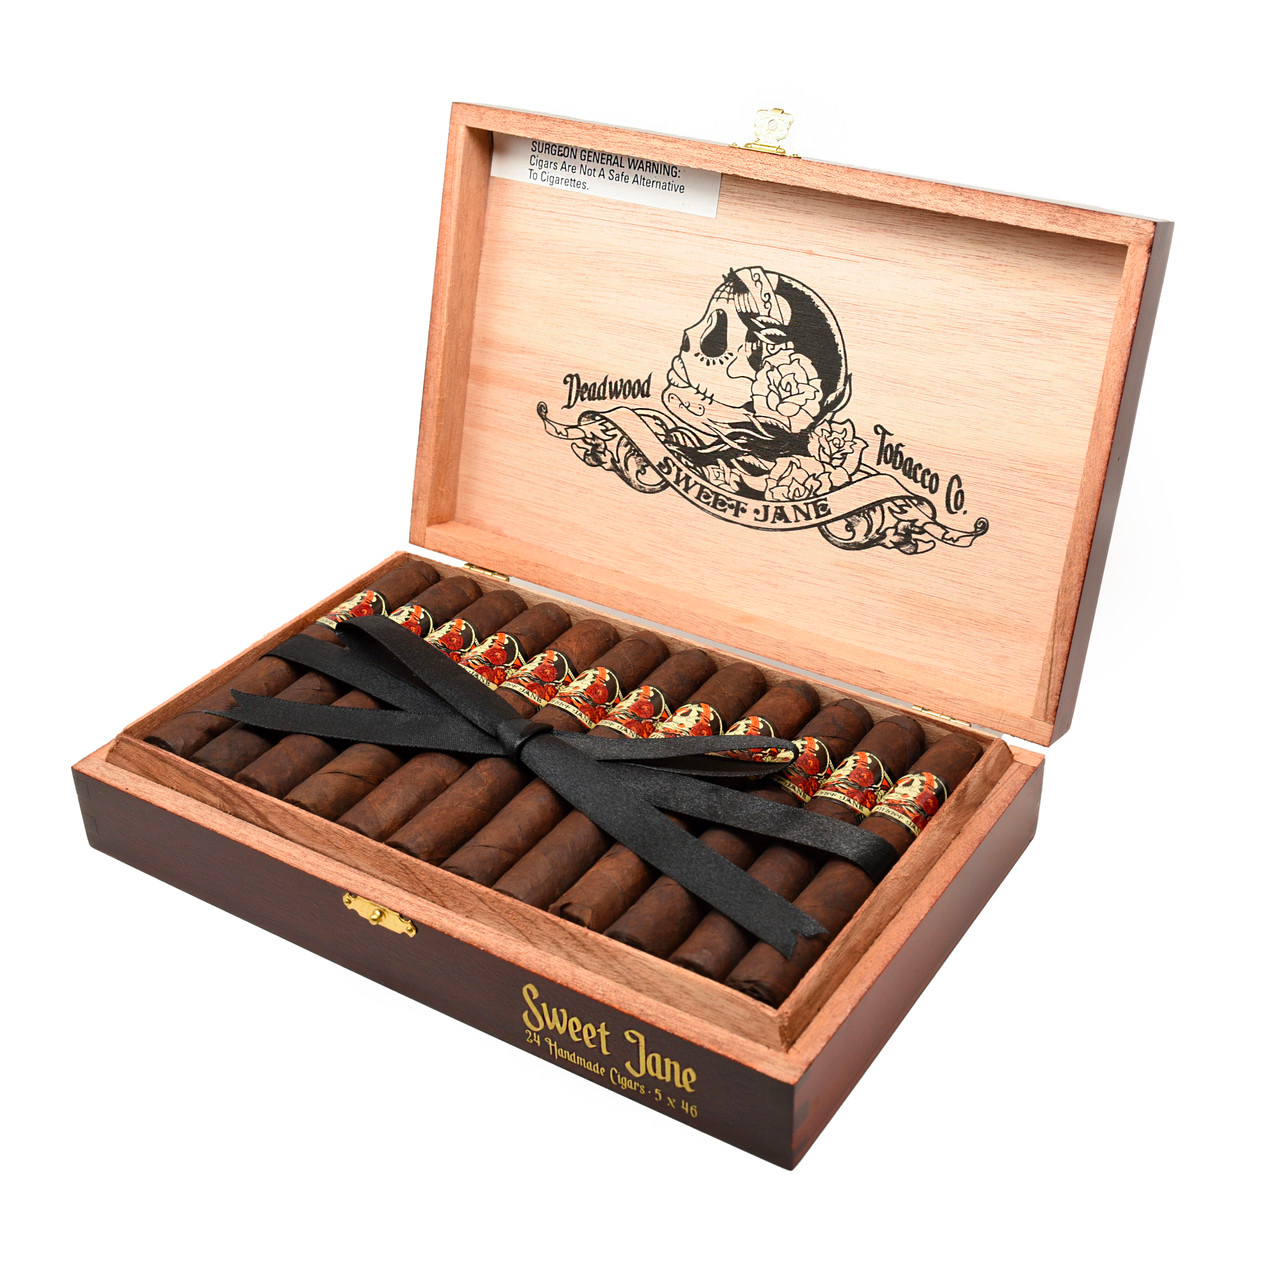 A box of Sweet Jane cigars from Deadwood Tobacco Company